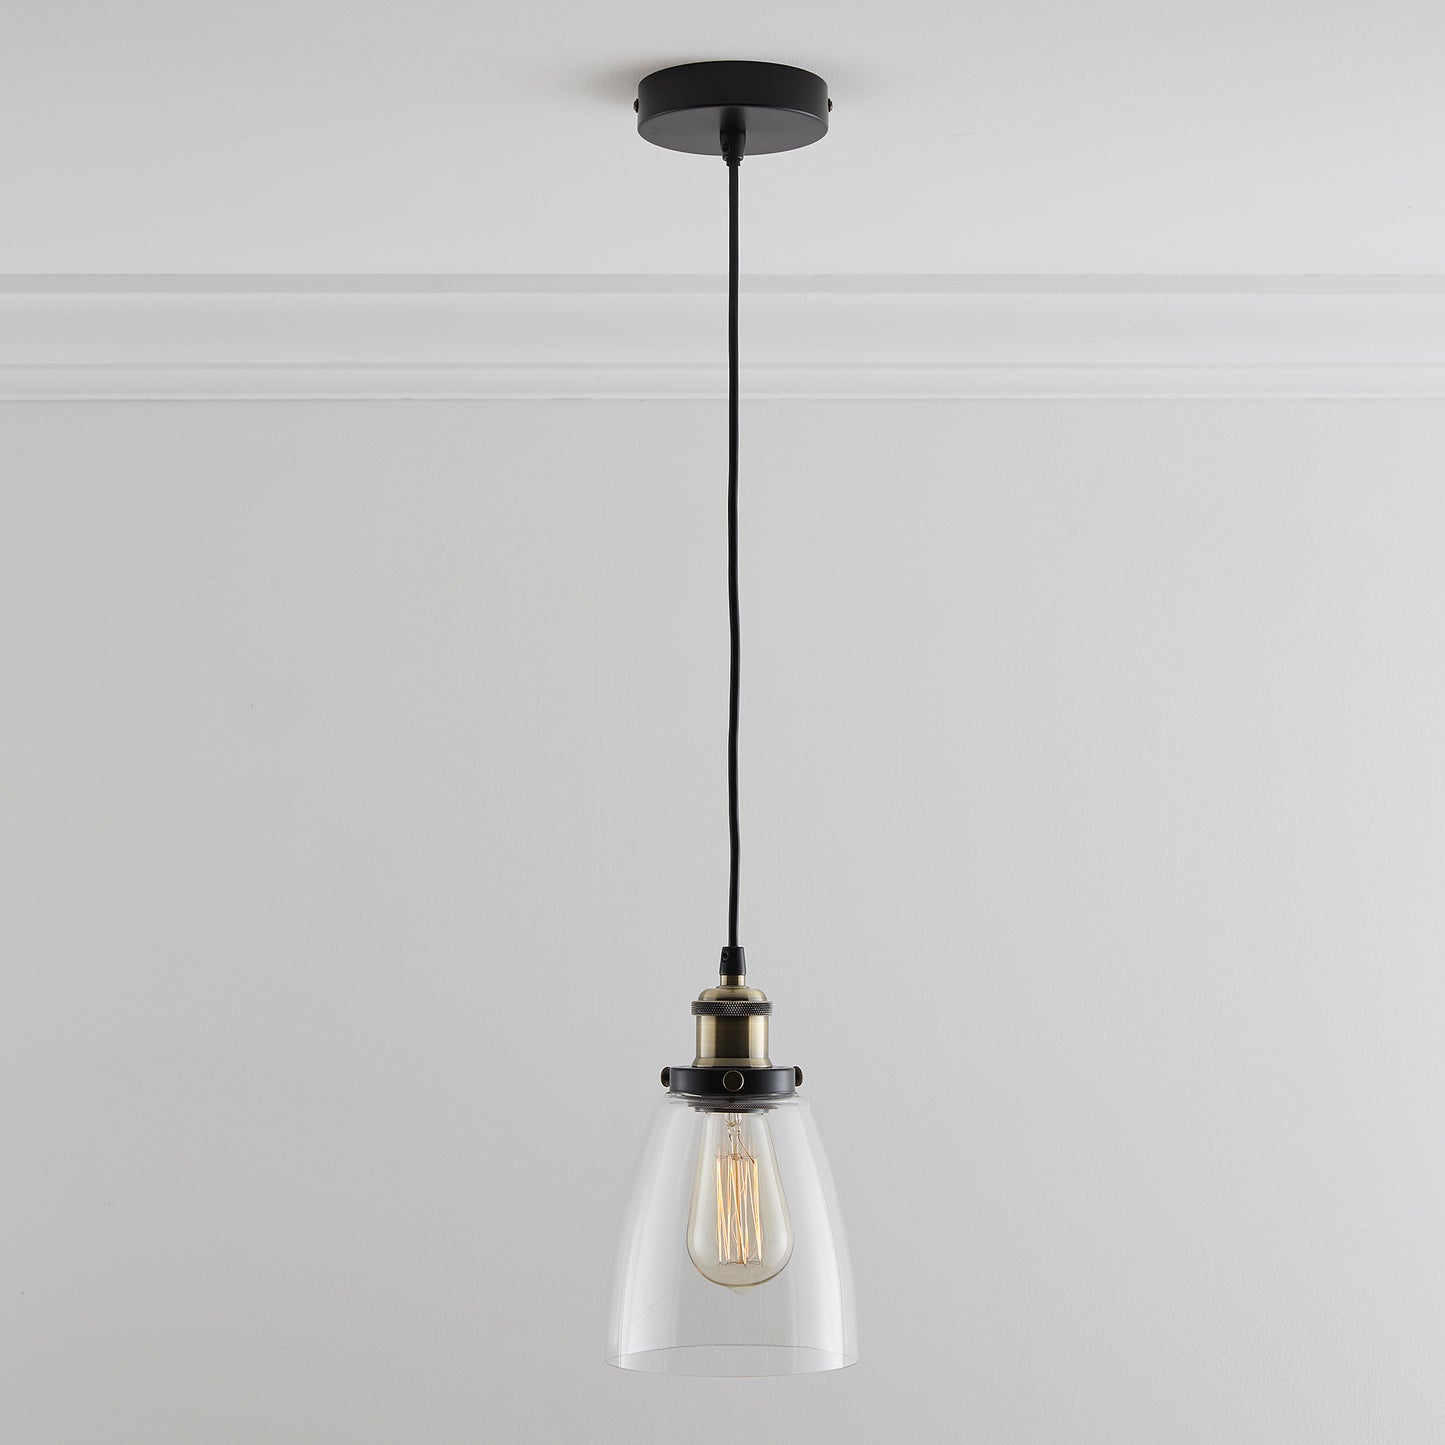 Glass Ceiling Pendant 1 Light in Amber or Smokey finishes, Including Filament Bulb